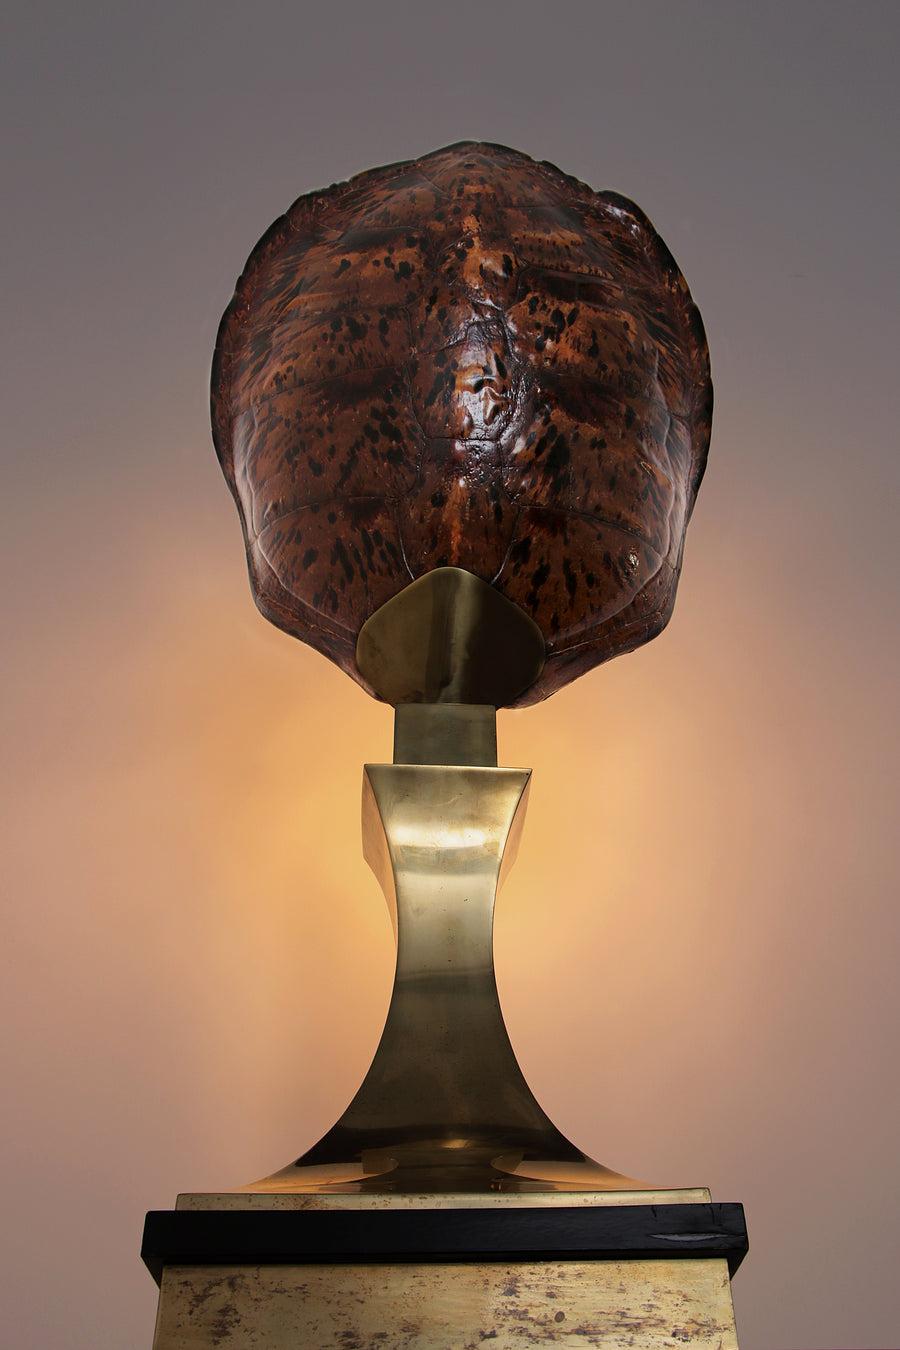 Willy Daro Floor Lamp Turtle with Brass by Maison Jansen, 1970s

Willy Daro (attribution), brass, tortoise shell, lacquered wood, France, circa 1970.

This table lamp is attributed to Willy Daro.

The piece is typical of 1970s French design, as the